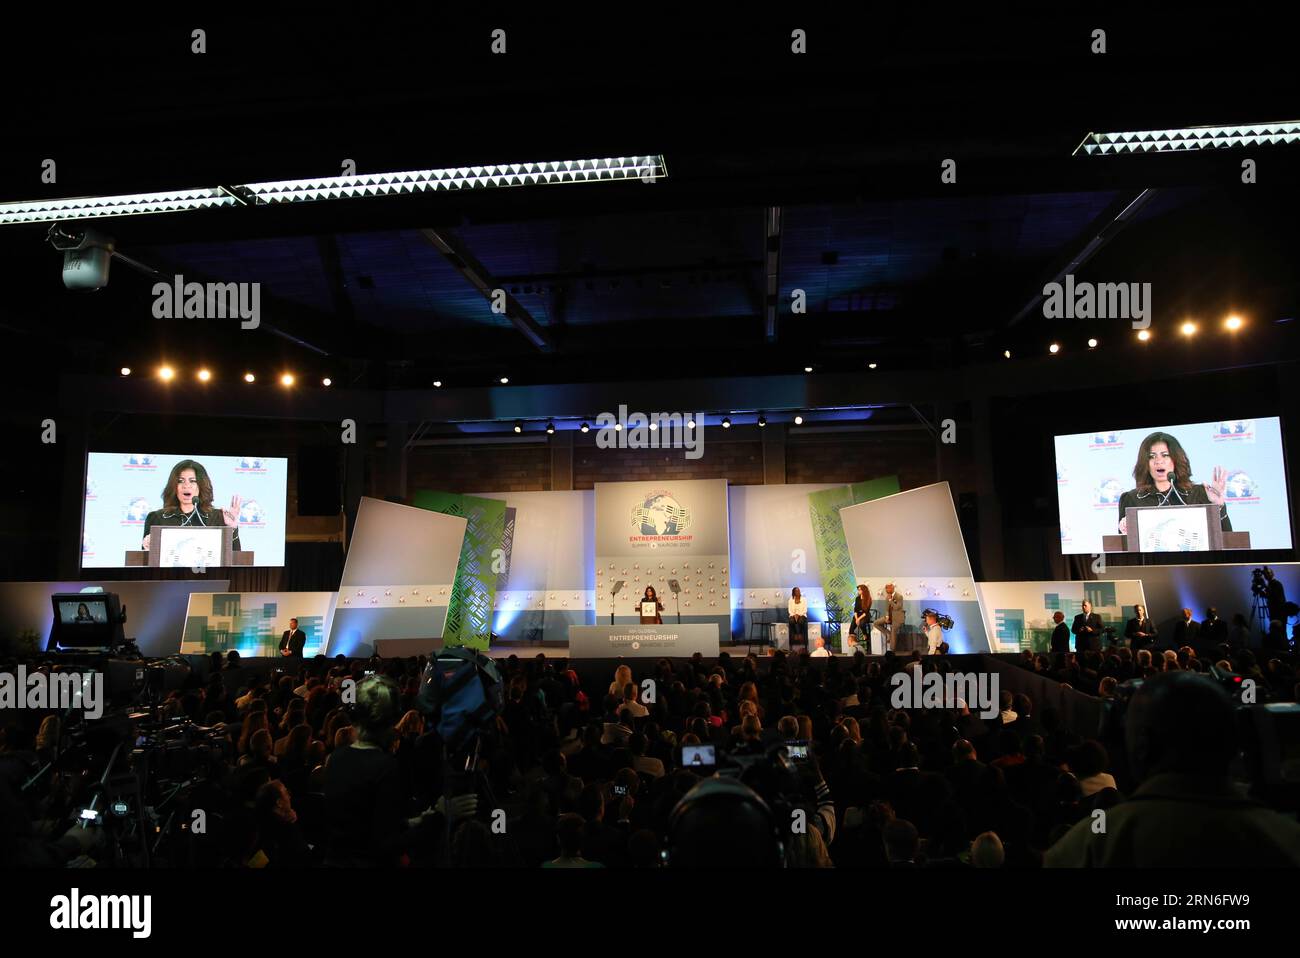 (150725) -- NAIROBI, July 25, 2015, -- Photo taken on July 25, 2015 shows a scene of the Opening Plenary of the Global Entrepreneurship Summit in Nairobi, Kenya. U.S. President Barack Obama attended the Global Entrepreneurship Summit (GES) in Nairobi on Saturday and hailed Africa s enormous potential. Kenya is the first country in Sub-Saharan Africa to host the summit. ) (dzl) KENYA-NAIROBI-U.S.-GES SUMMIT PanxSiwei PUBLICATIONxNOTxINxCHN   150725 Nairobi July 25 2015 Photo Taken ON July 25 2015 Shows a Scene of The Opening Plenary of The Global Entrepreneurship Summit in Nairobi Kenya U S Pre Stock Photo